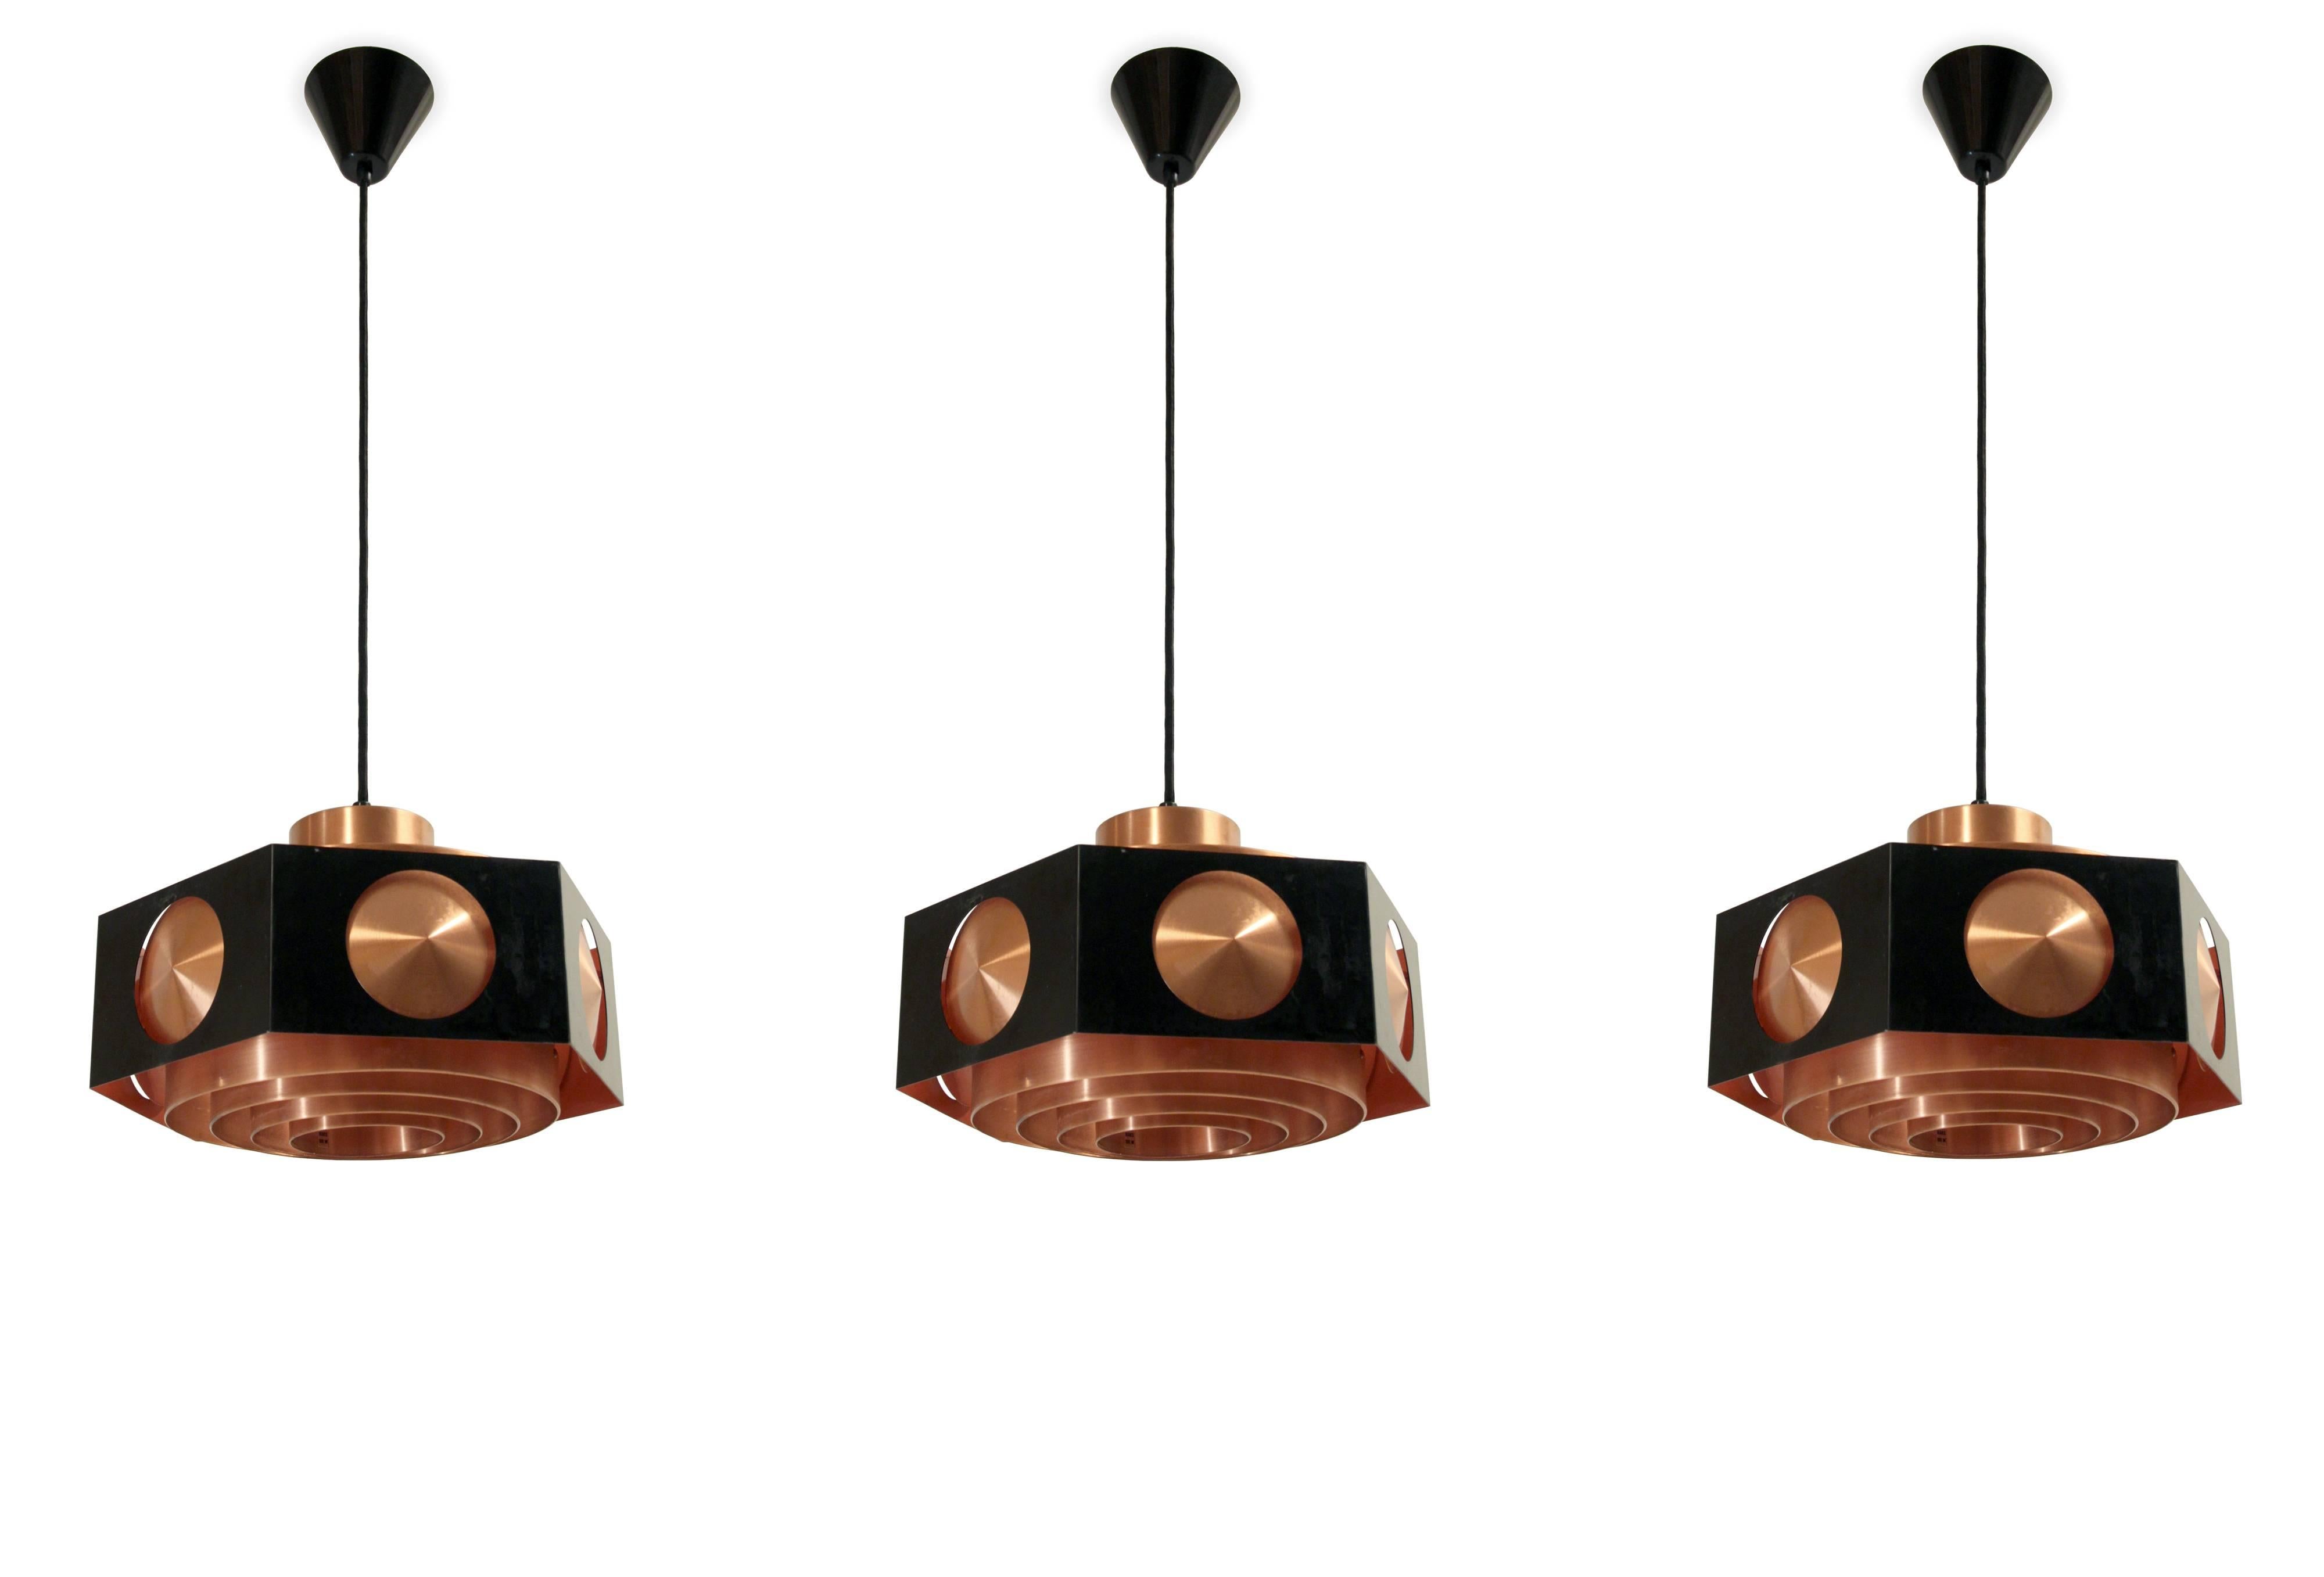 Wonderful and rare set of three ceiling pendants in copper and painted steel. Designed and made in Norway by T. Røstad & Co. from circa 1960s second half. The lamps are fully working and in very good vintage condition. Each lamp holds one E27 bulb